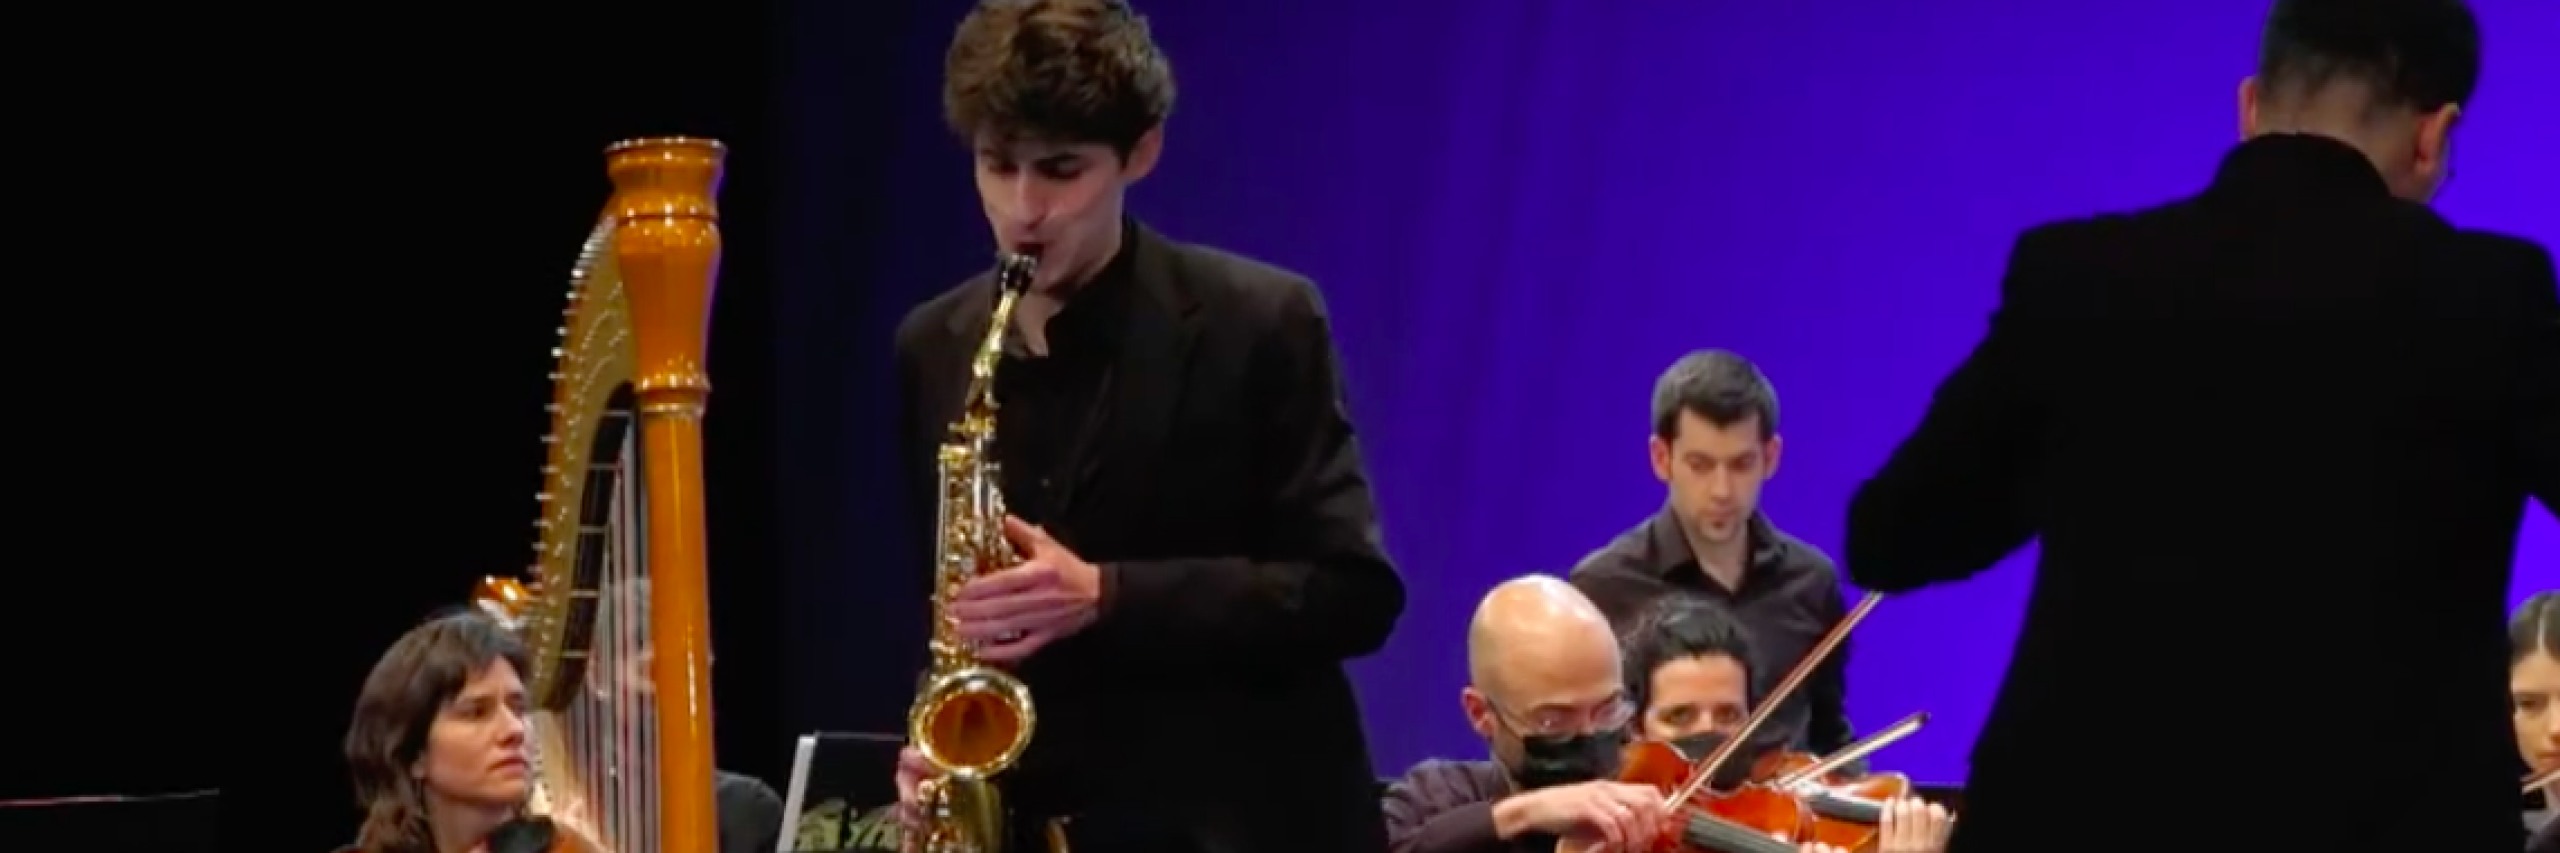 Winners of the Andorra International Saxophone Competition